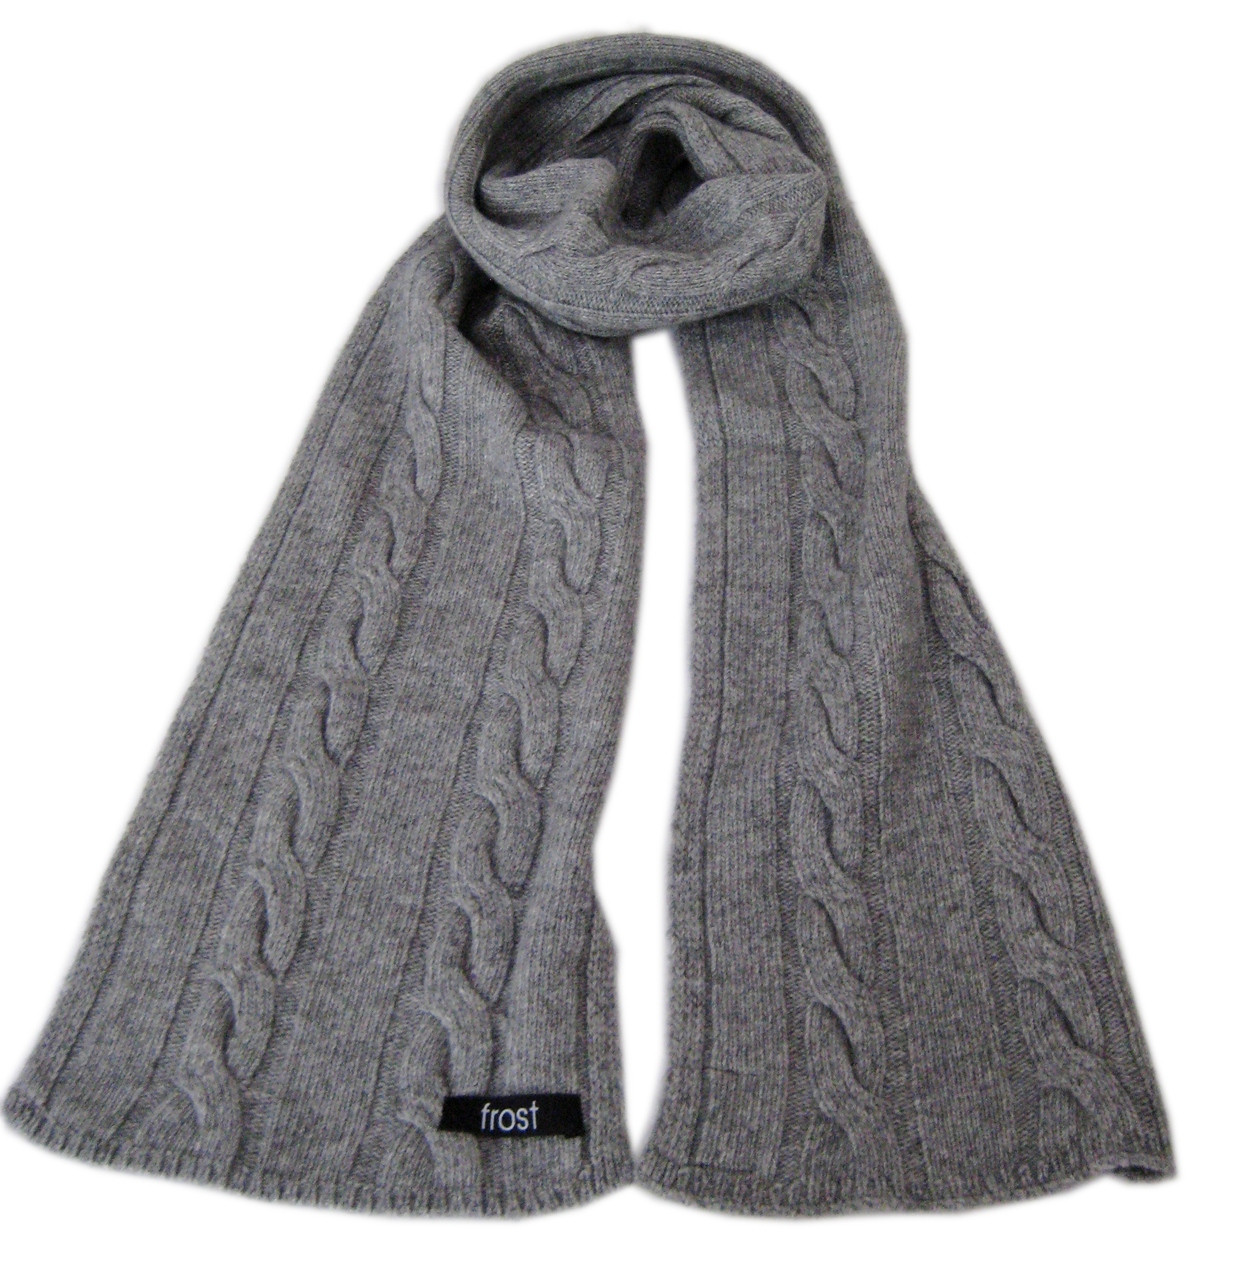 Classic Cable Knit Scarf| Cashmere Scarf for Women| Wool Scarf